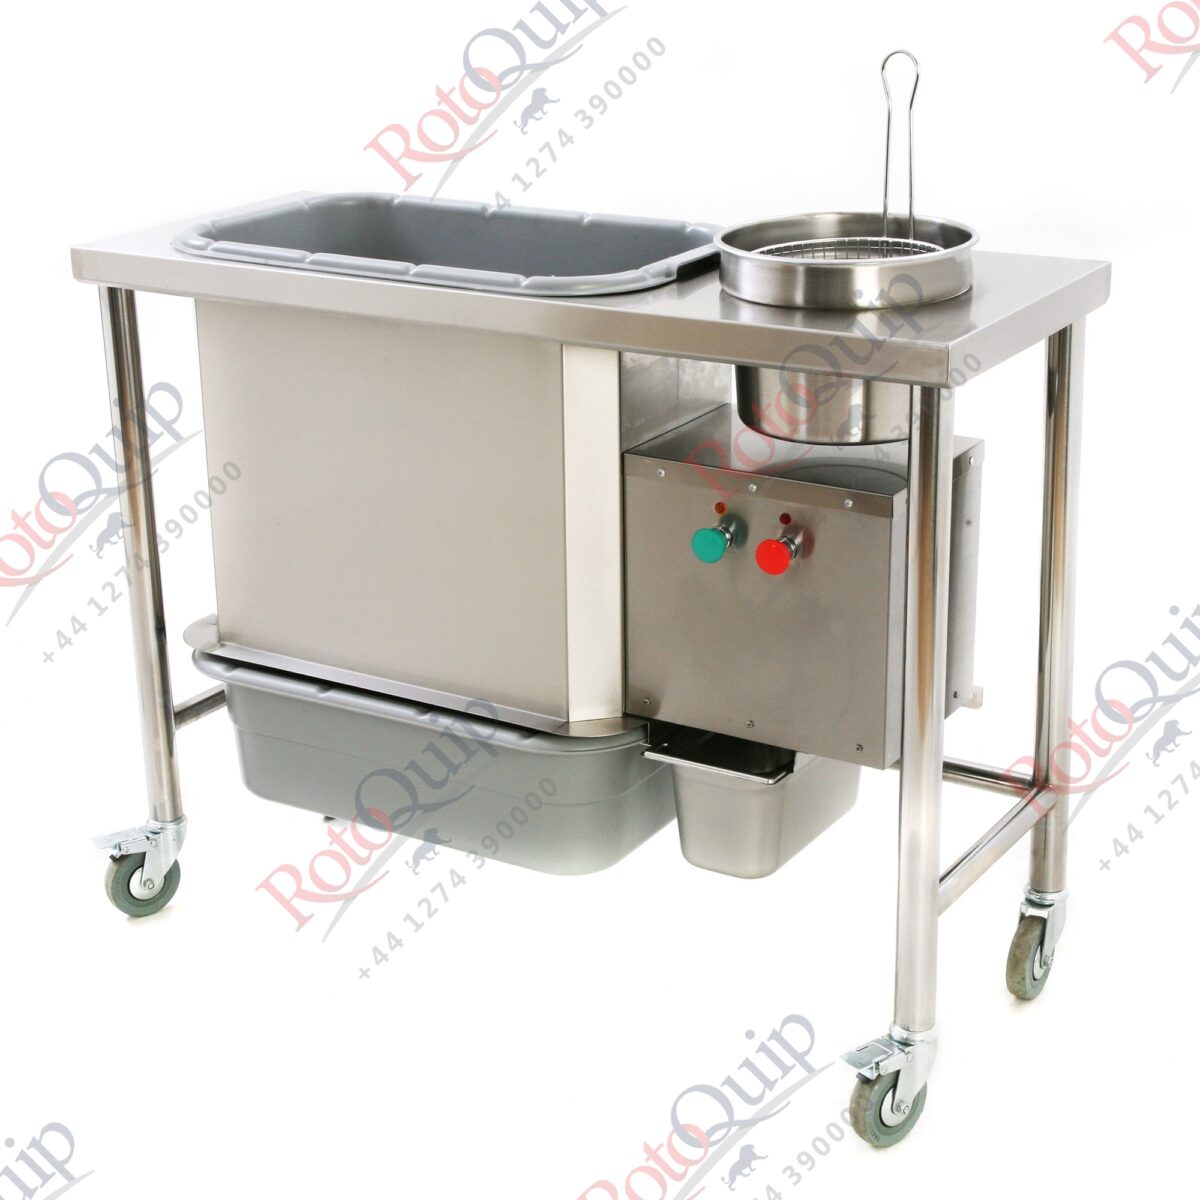 RBT-2 – Automatic Breading Table – Standard